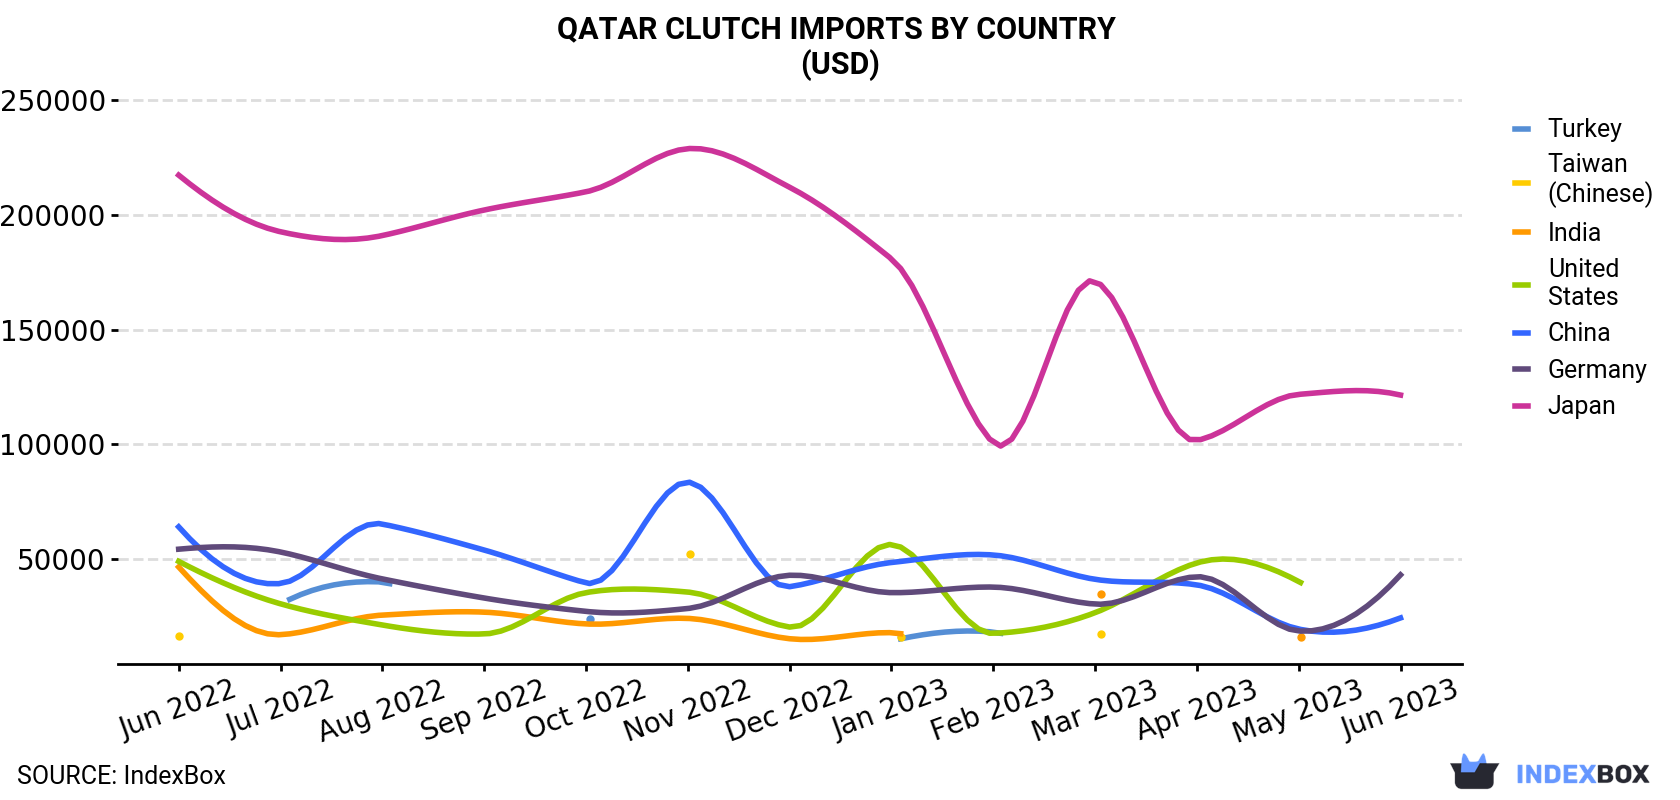 Qatar Clutch Imports By Country (USD)